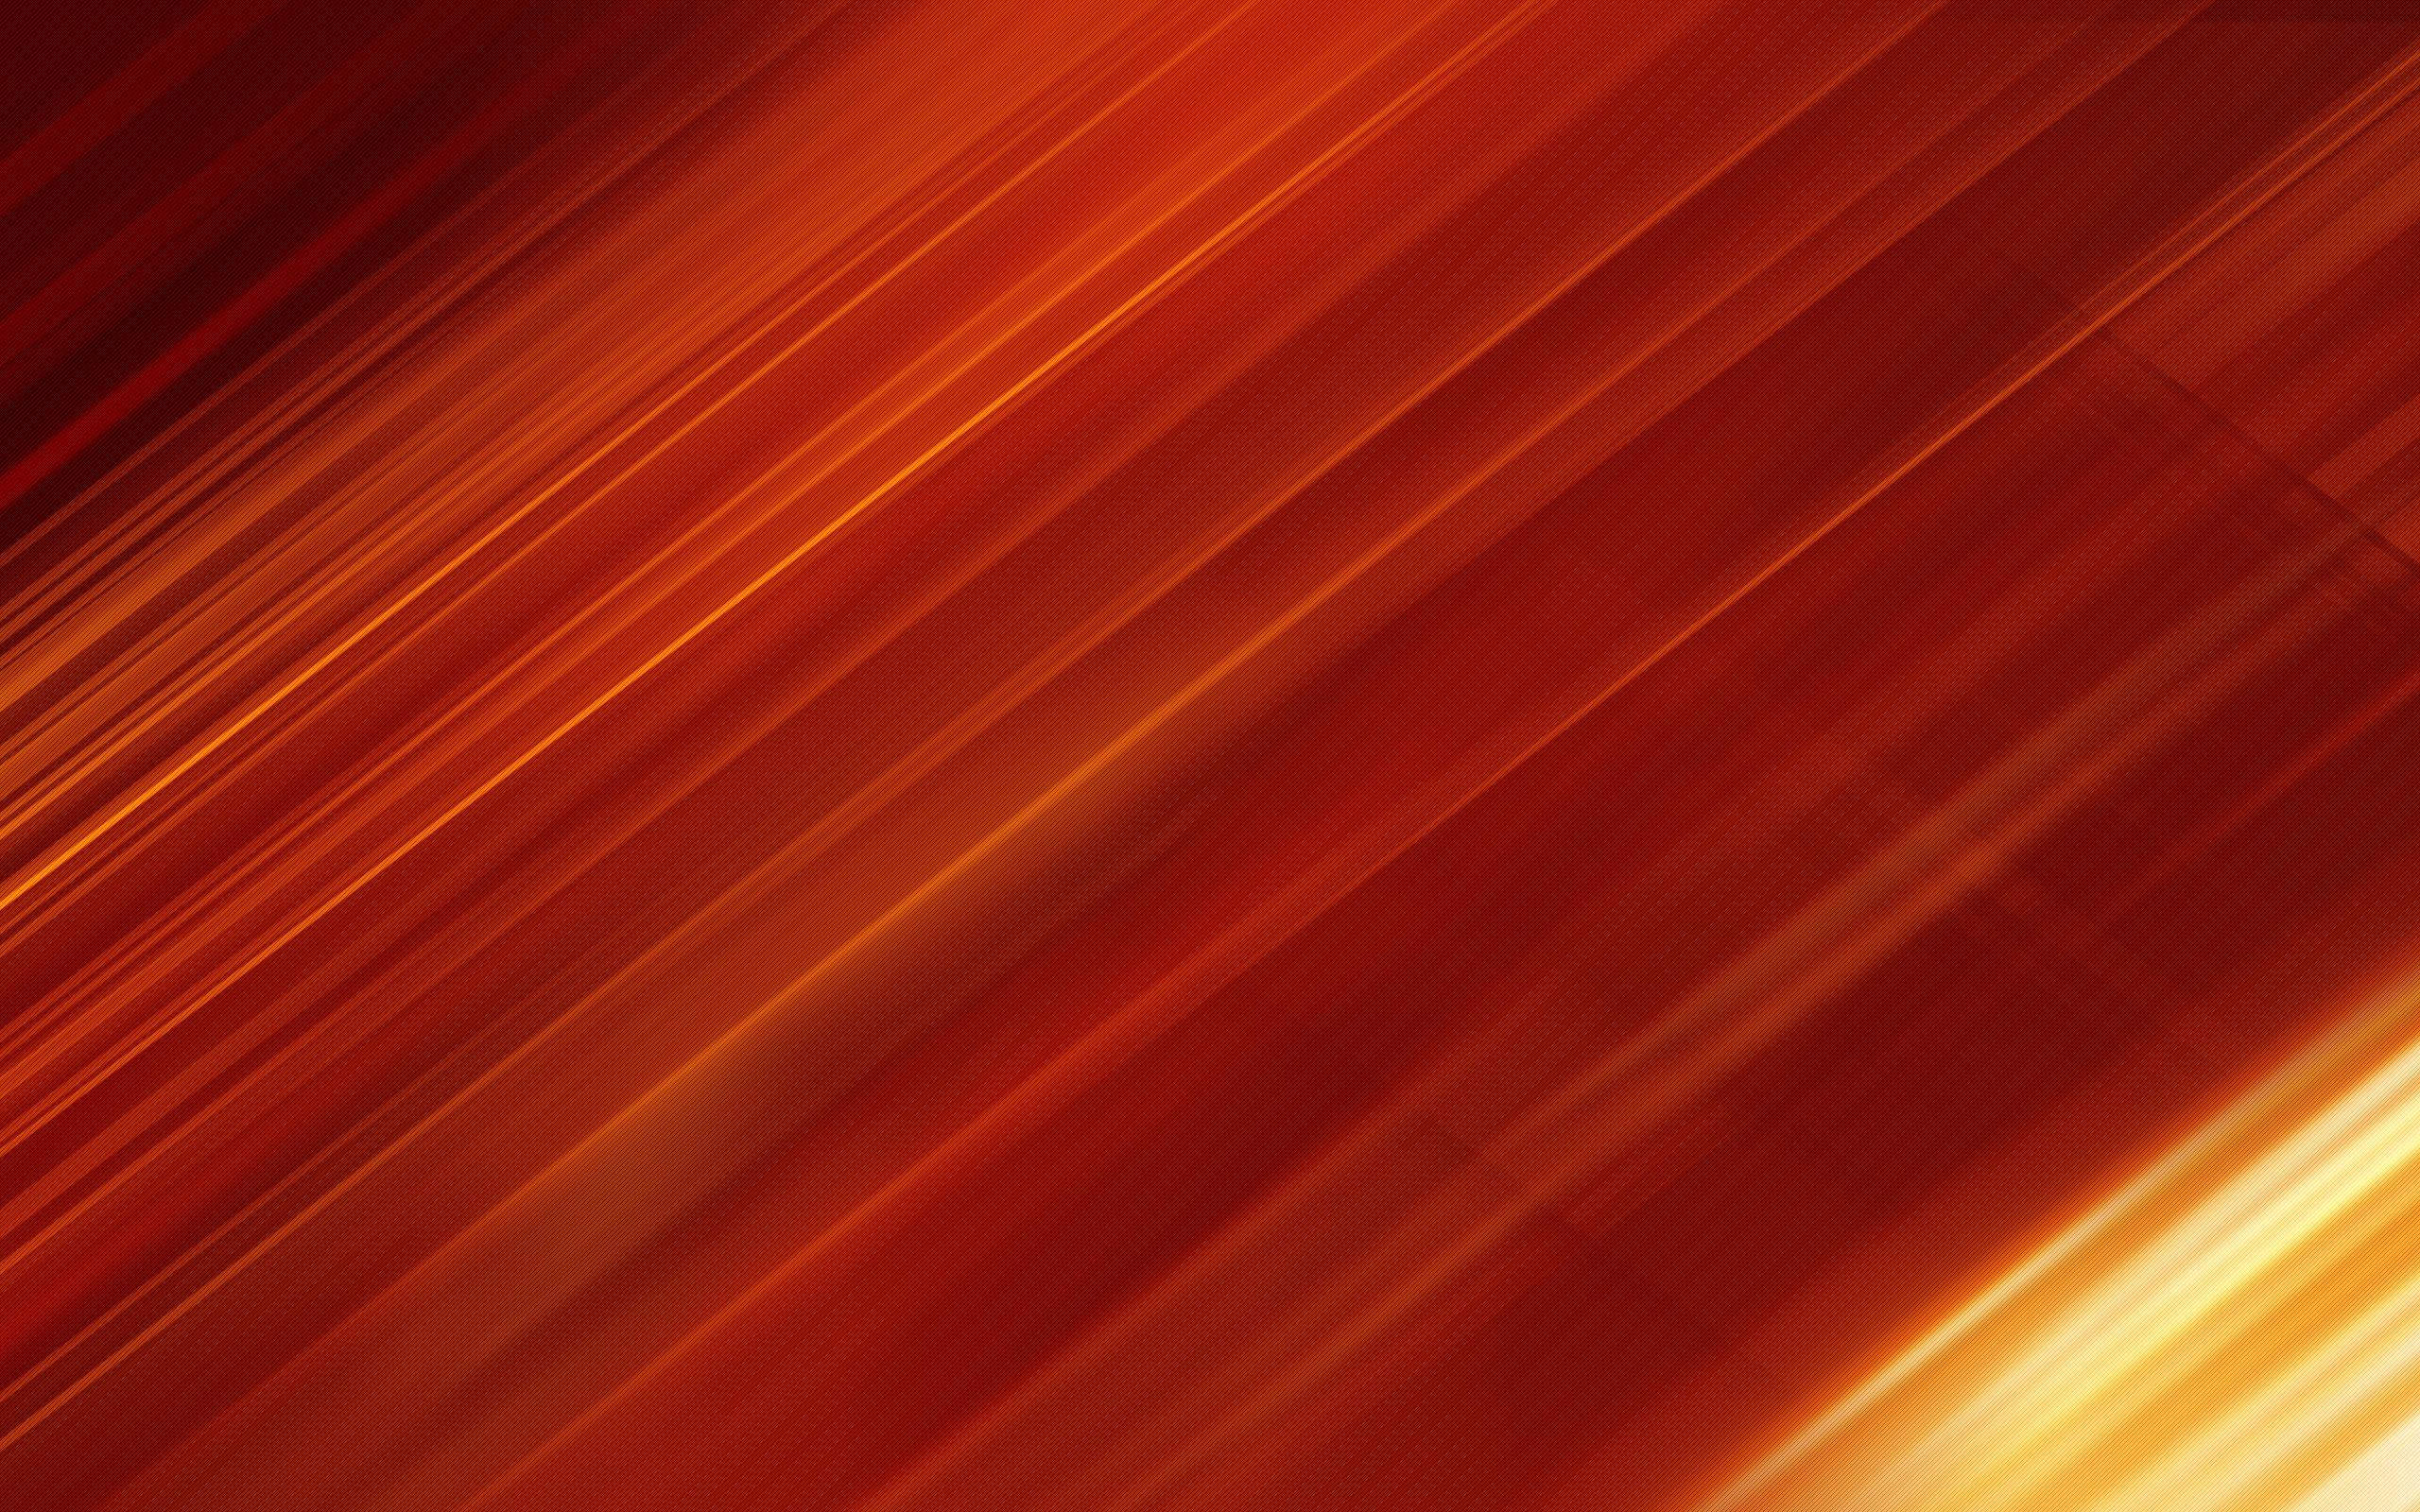 red and gold wallpaper designs